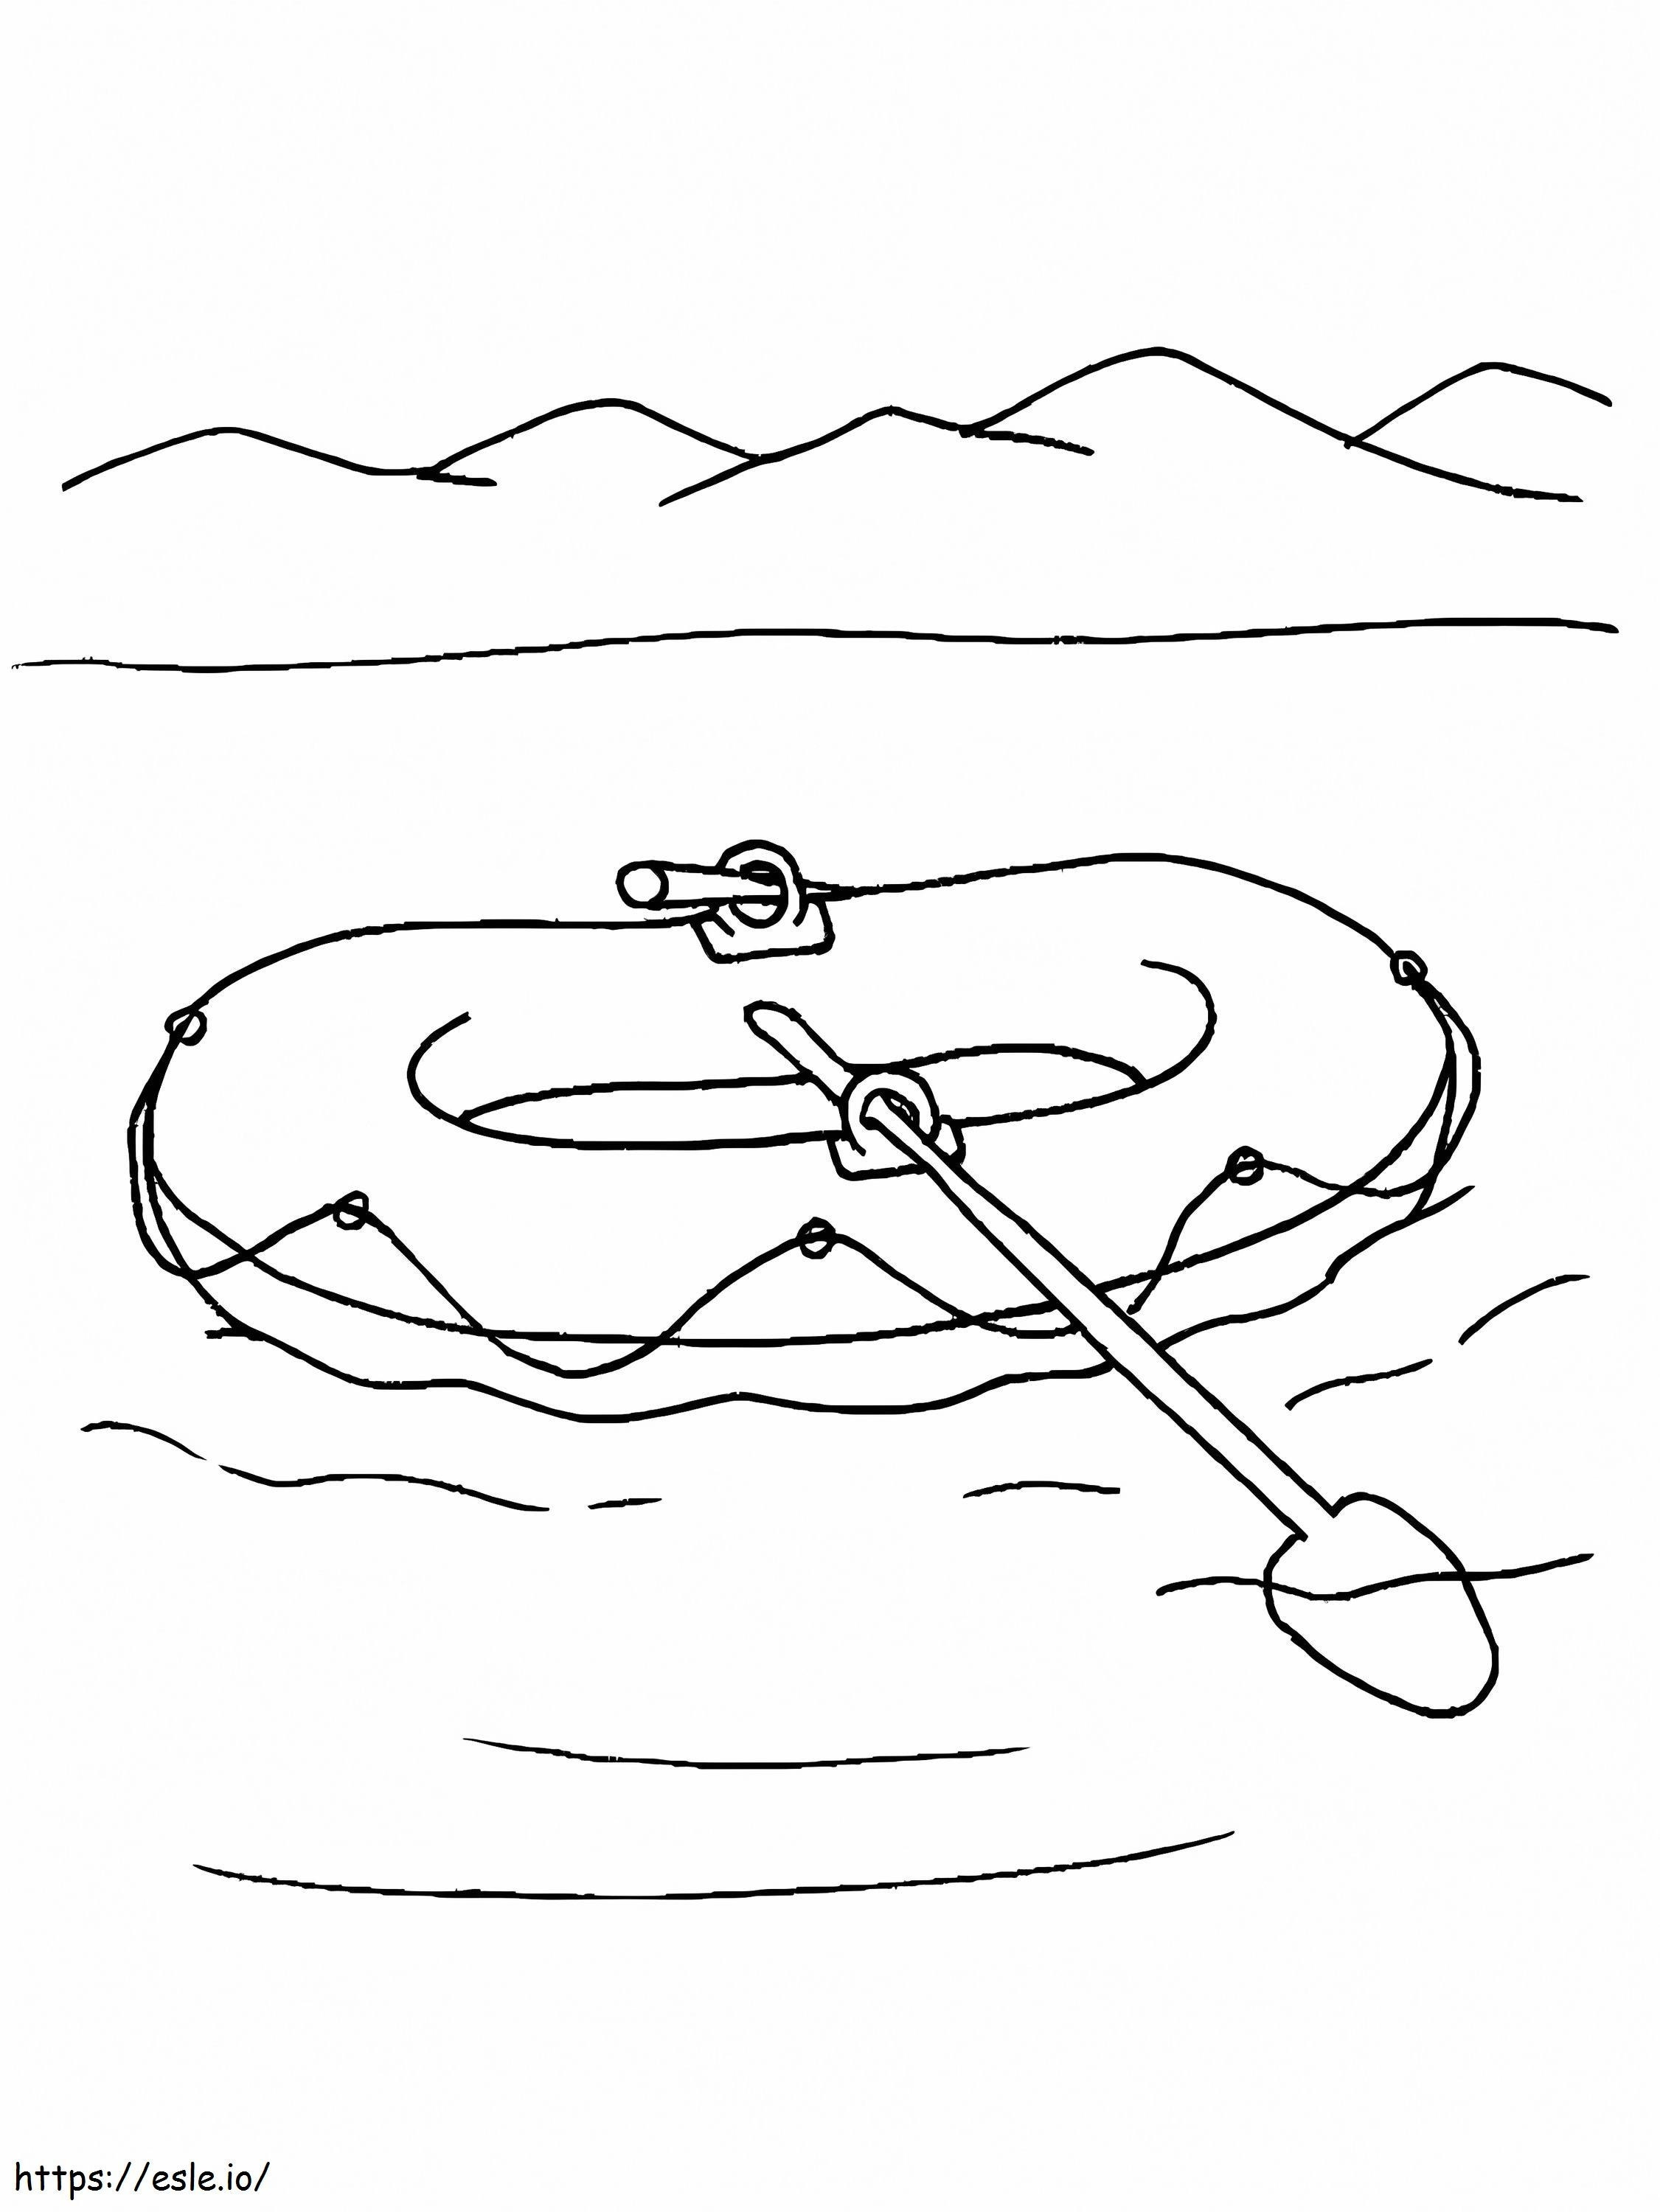 A Life Raft coloring page